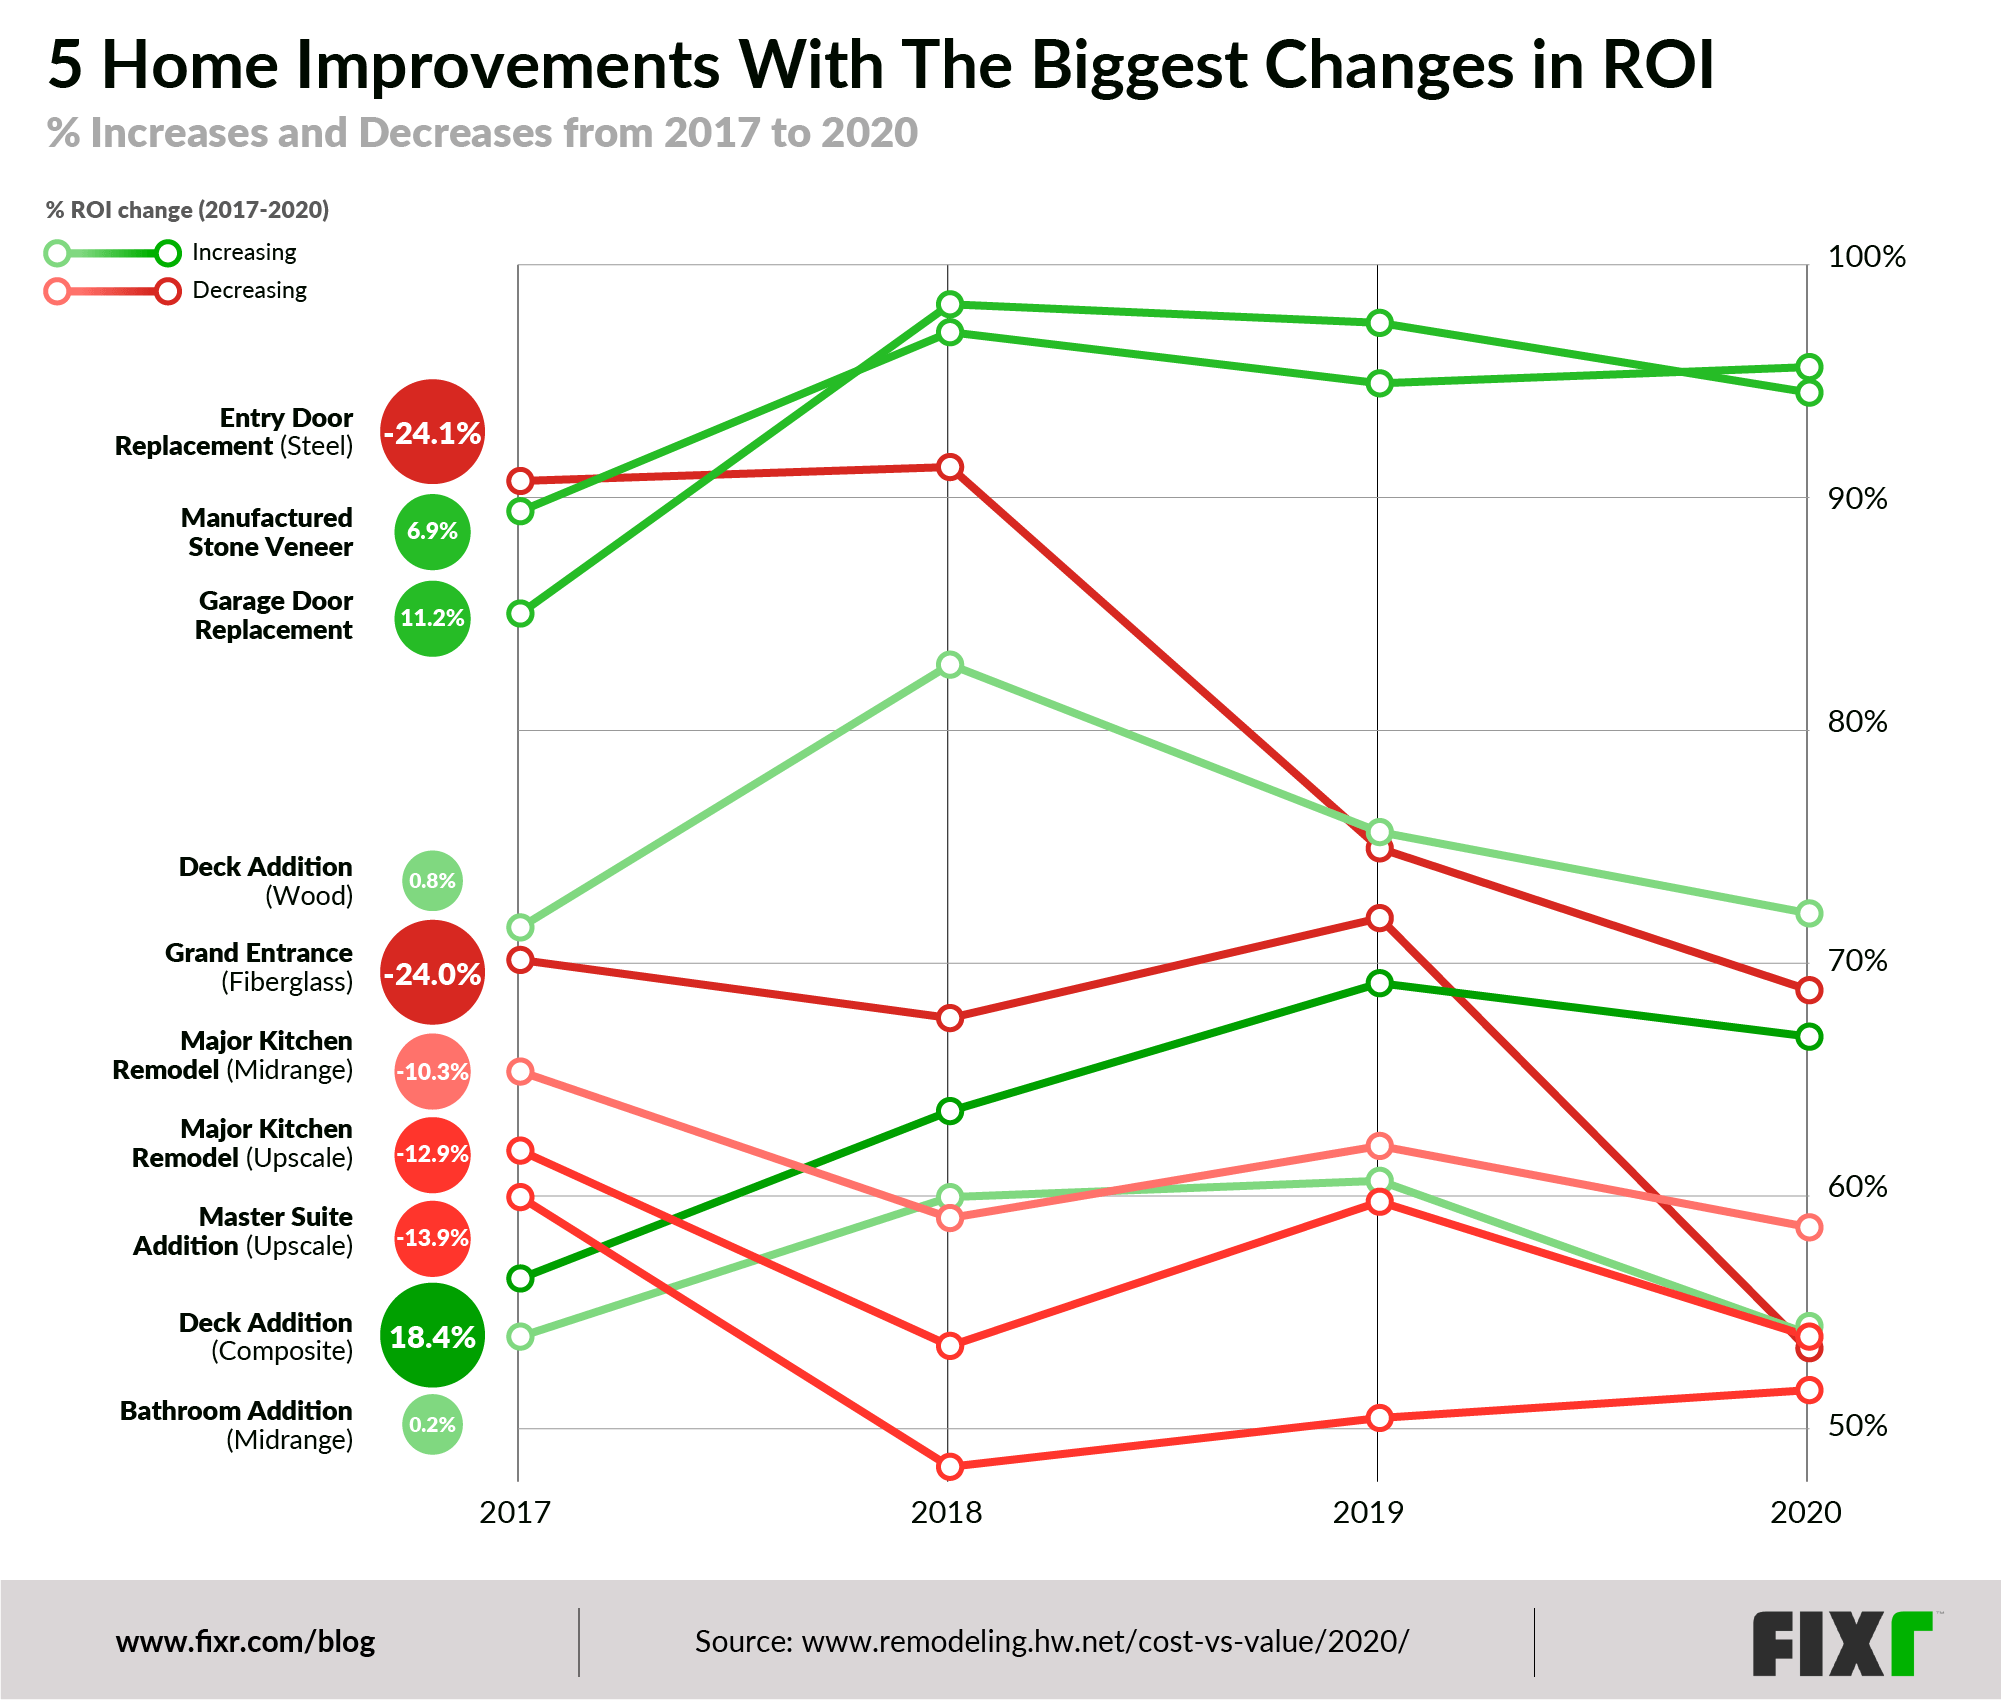 home improvements with the biggest changes in ROI